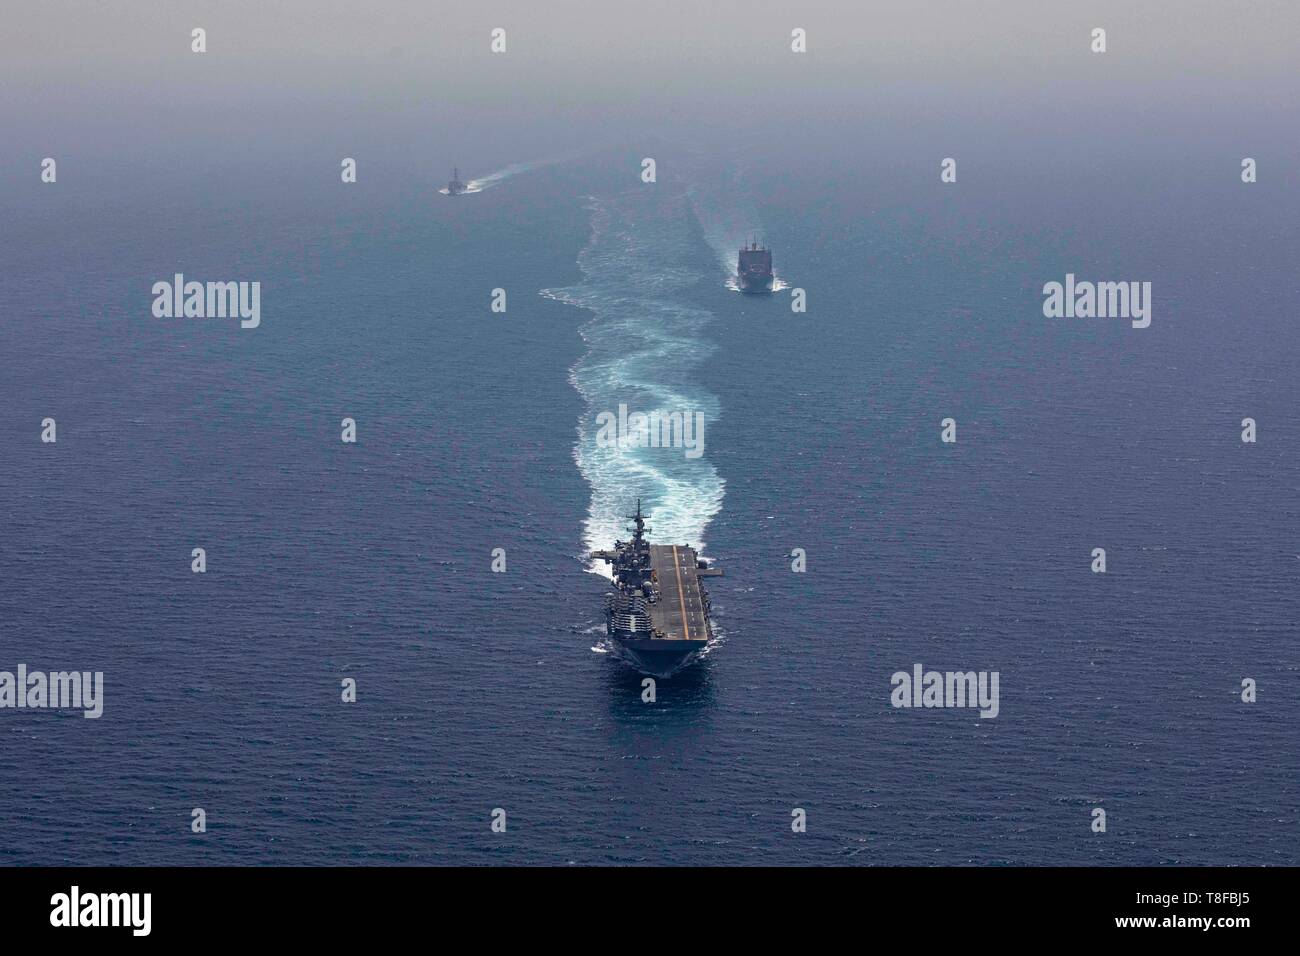 The U.S. Navy Wasp-class amphibious assault ship USS Kearsarge, center, the dry cargo and ammunition ship USNS Alan Shepard, right, and the Arleigh Burke-class guided-missile destroyer USS McFaul transit the Strait of Hormuz May 7, 2019 in the Arabian Sea. The patrol is part of additional forces being sent to the Middle East to counter what the Trump administration calls clear indications of threats from Iran. Stock Photo